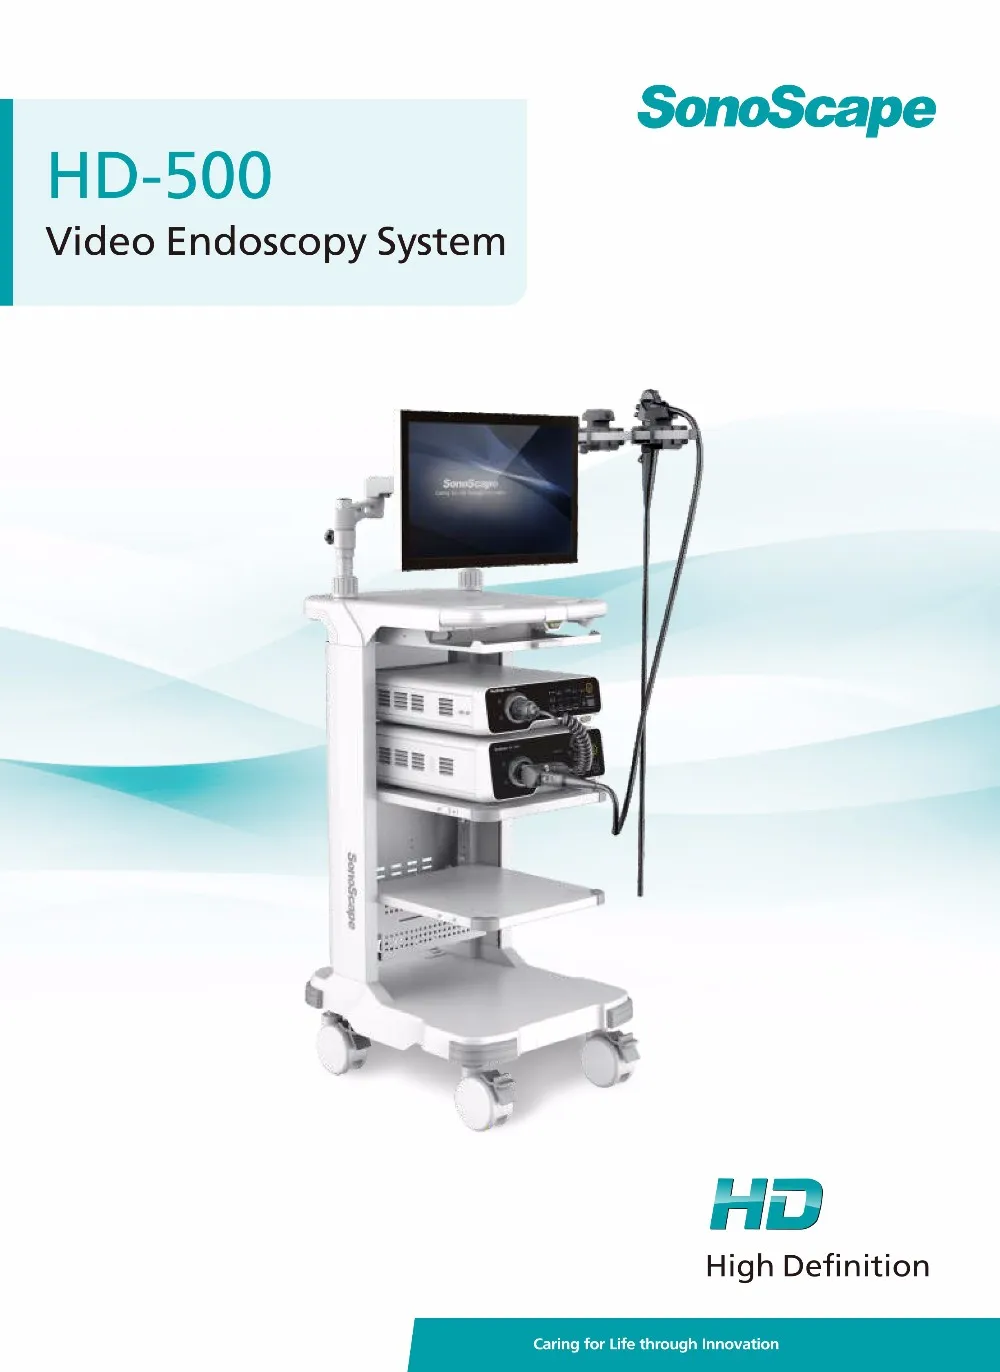 Sonoscape Hd-500 Video Endoscope System - Buy Colonoscope,Gastroscope,Surgical Instruments Product on Alibaba.com